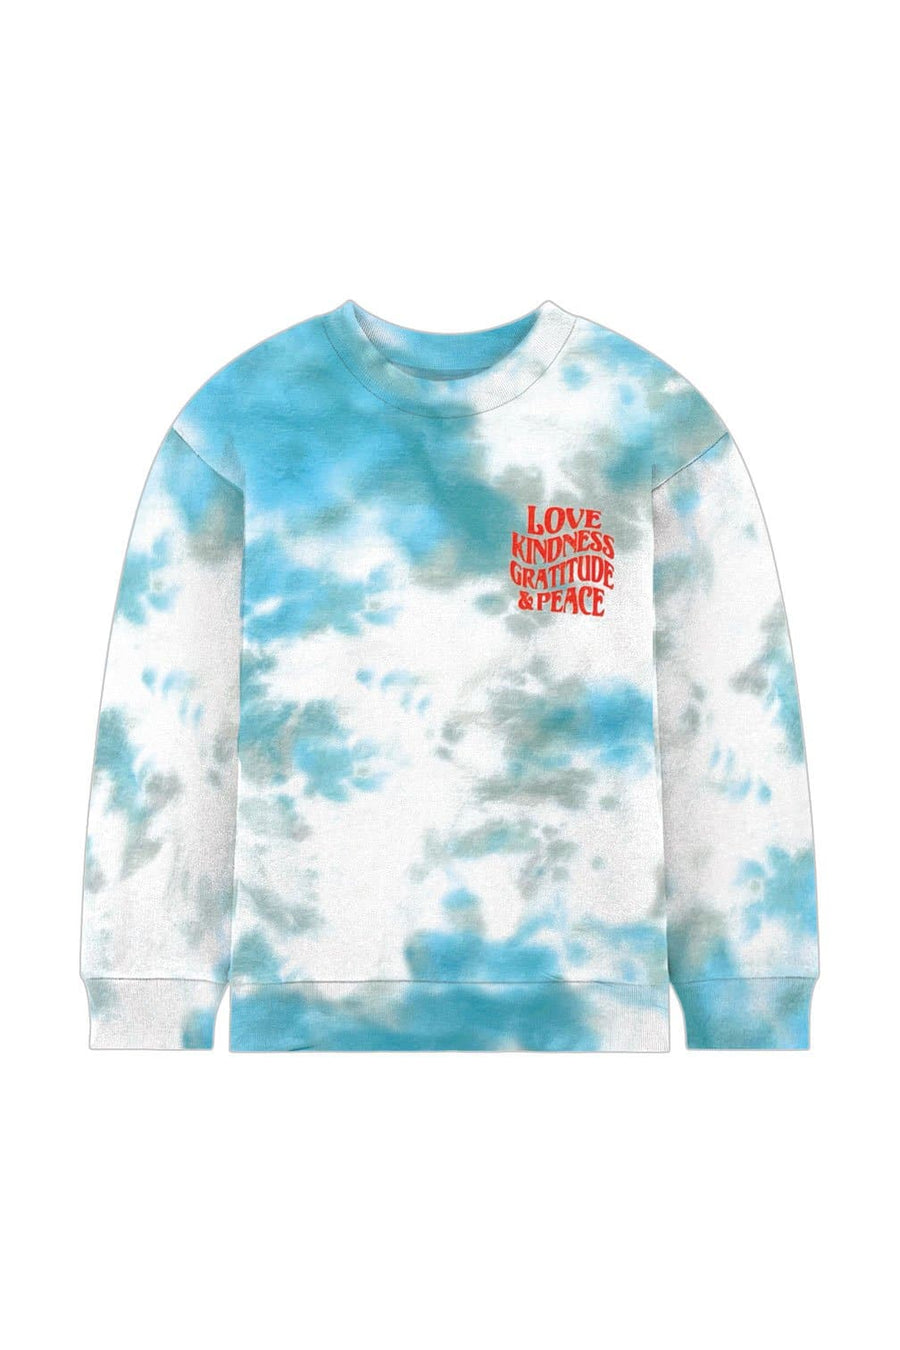 LOVE and KINDNESS People Sweatshirt - Teal and Grey